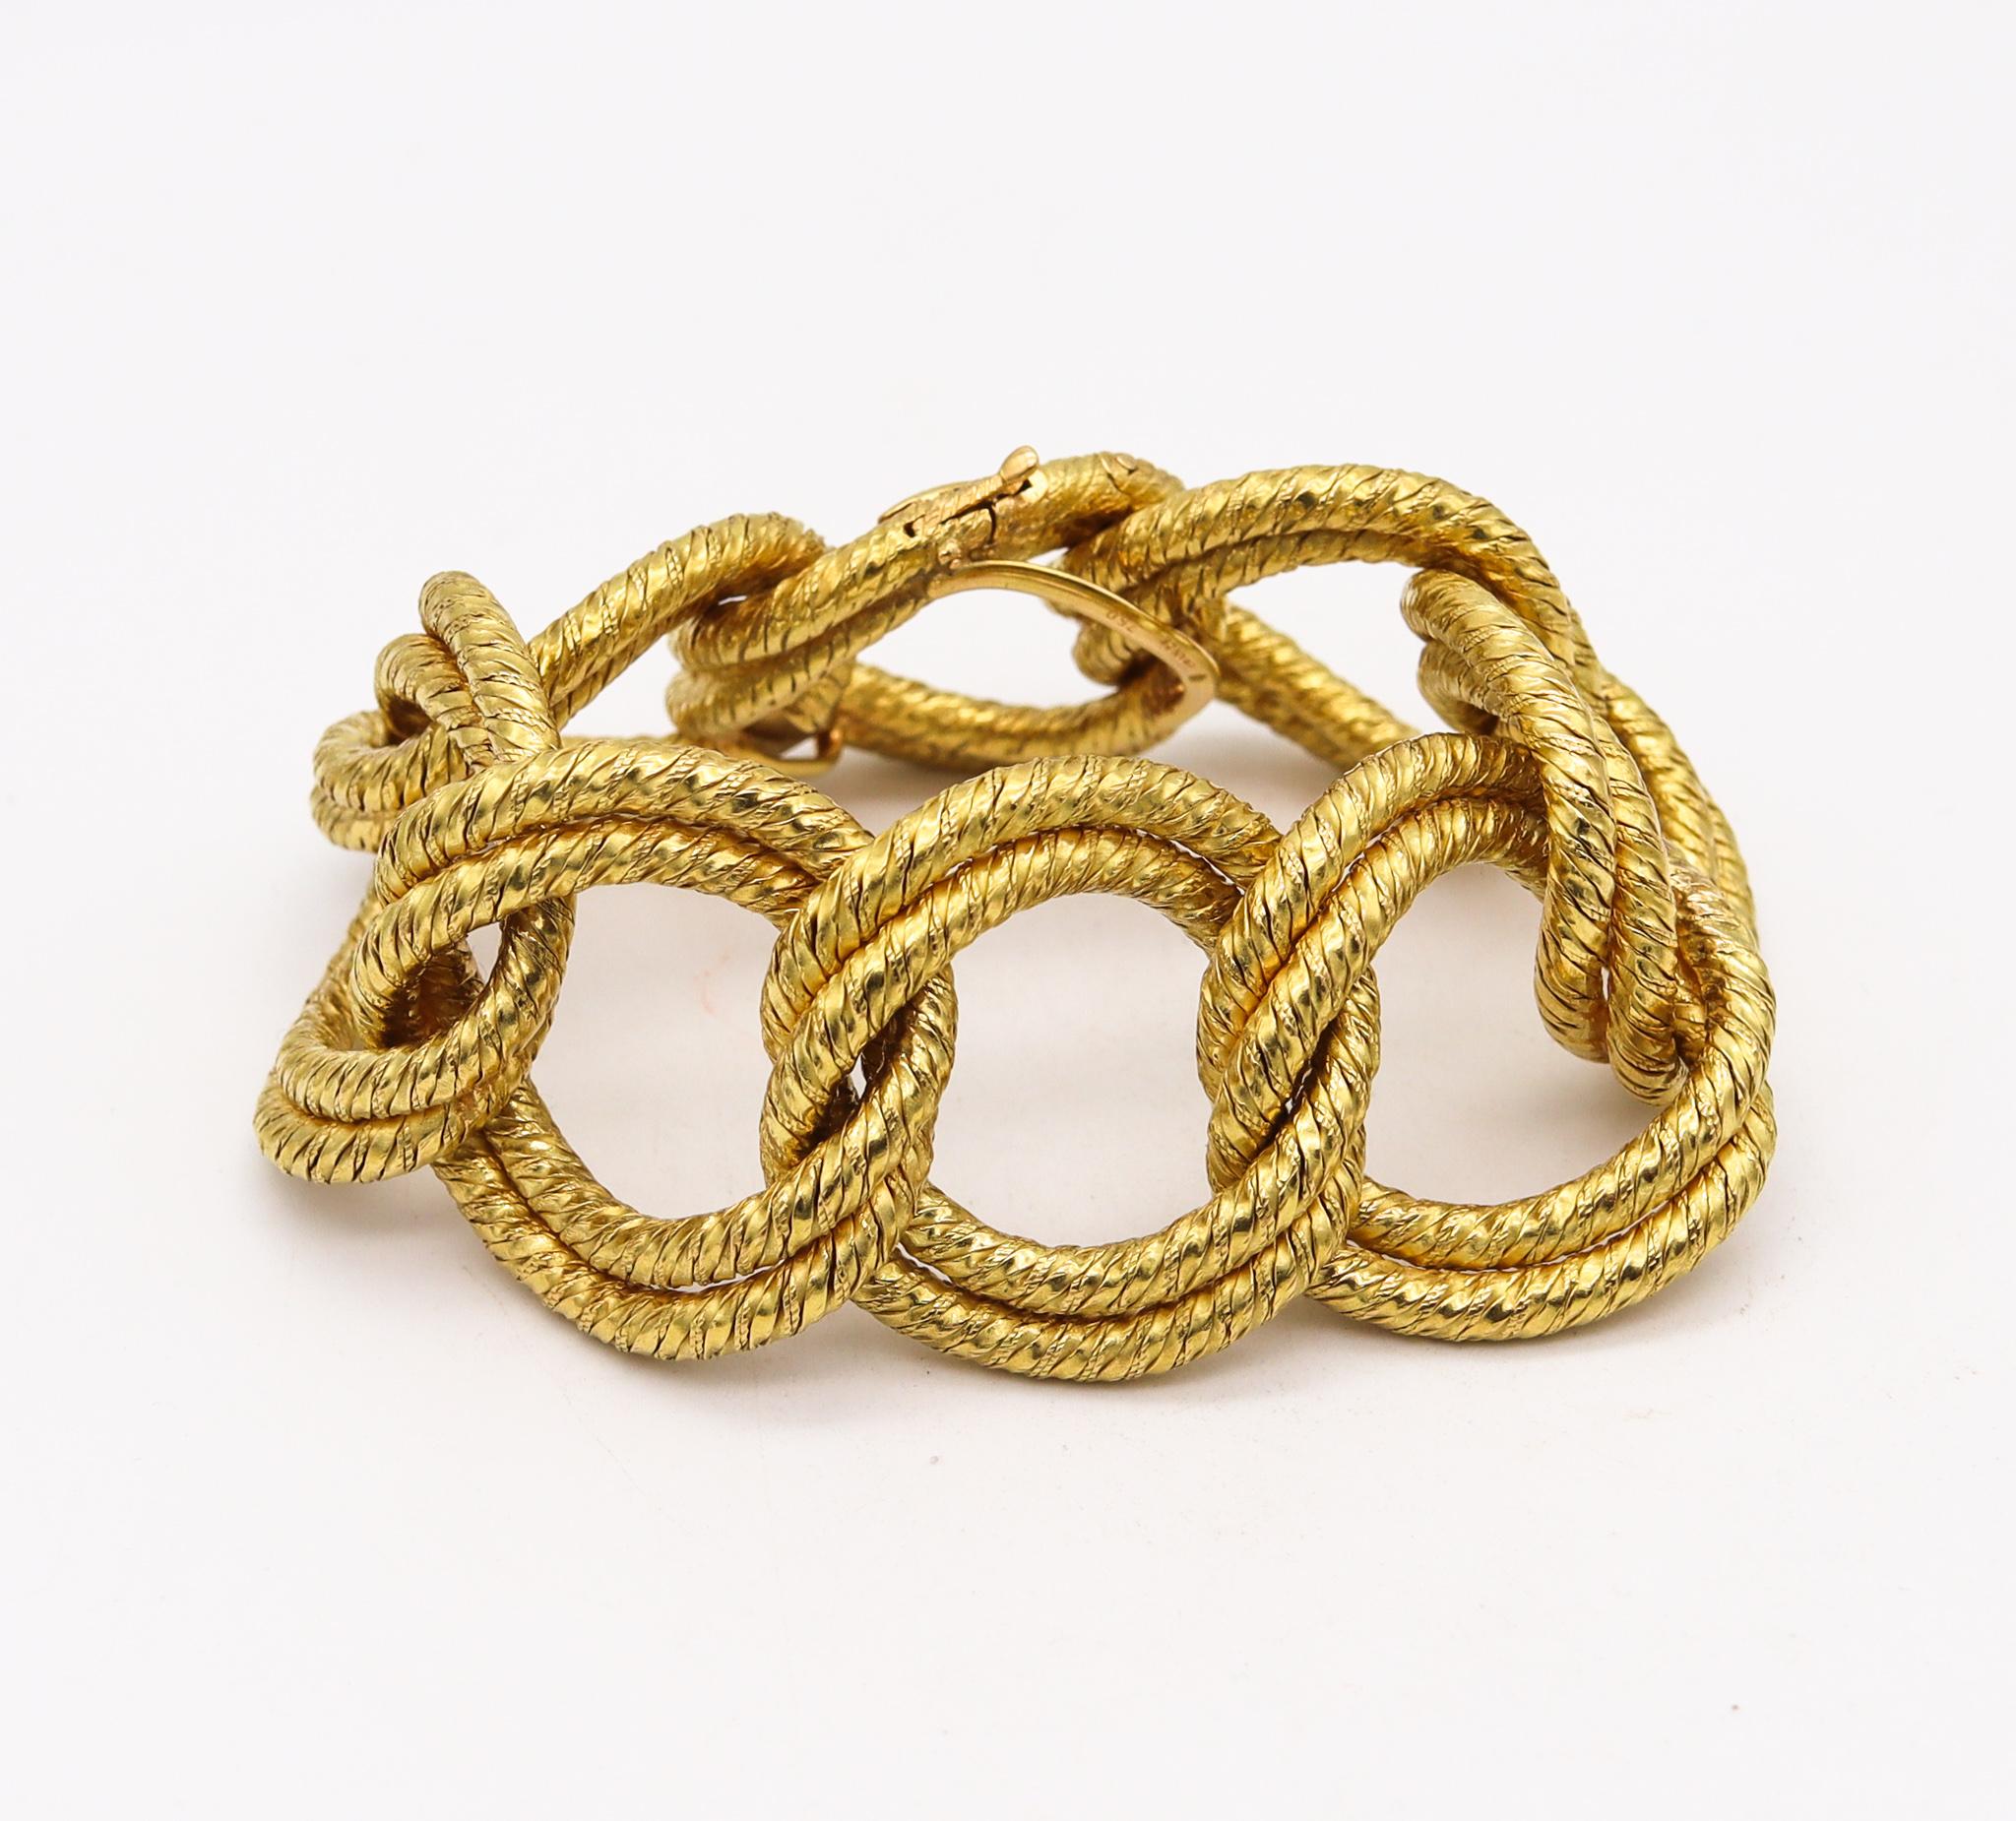 A double links bracelet designed by George L'Enfant.

An impressive, extraordinary and very rare Double Paillette bracelet, created at the atelier of George L'Enfant in Paris France at the end of the 1960's. This bold bracelet was crafted in solid